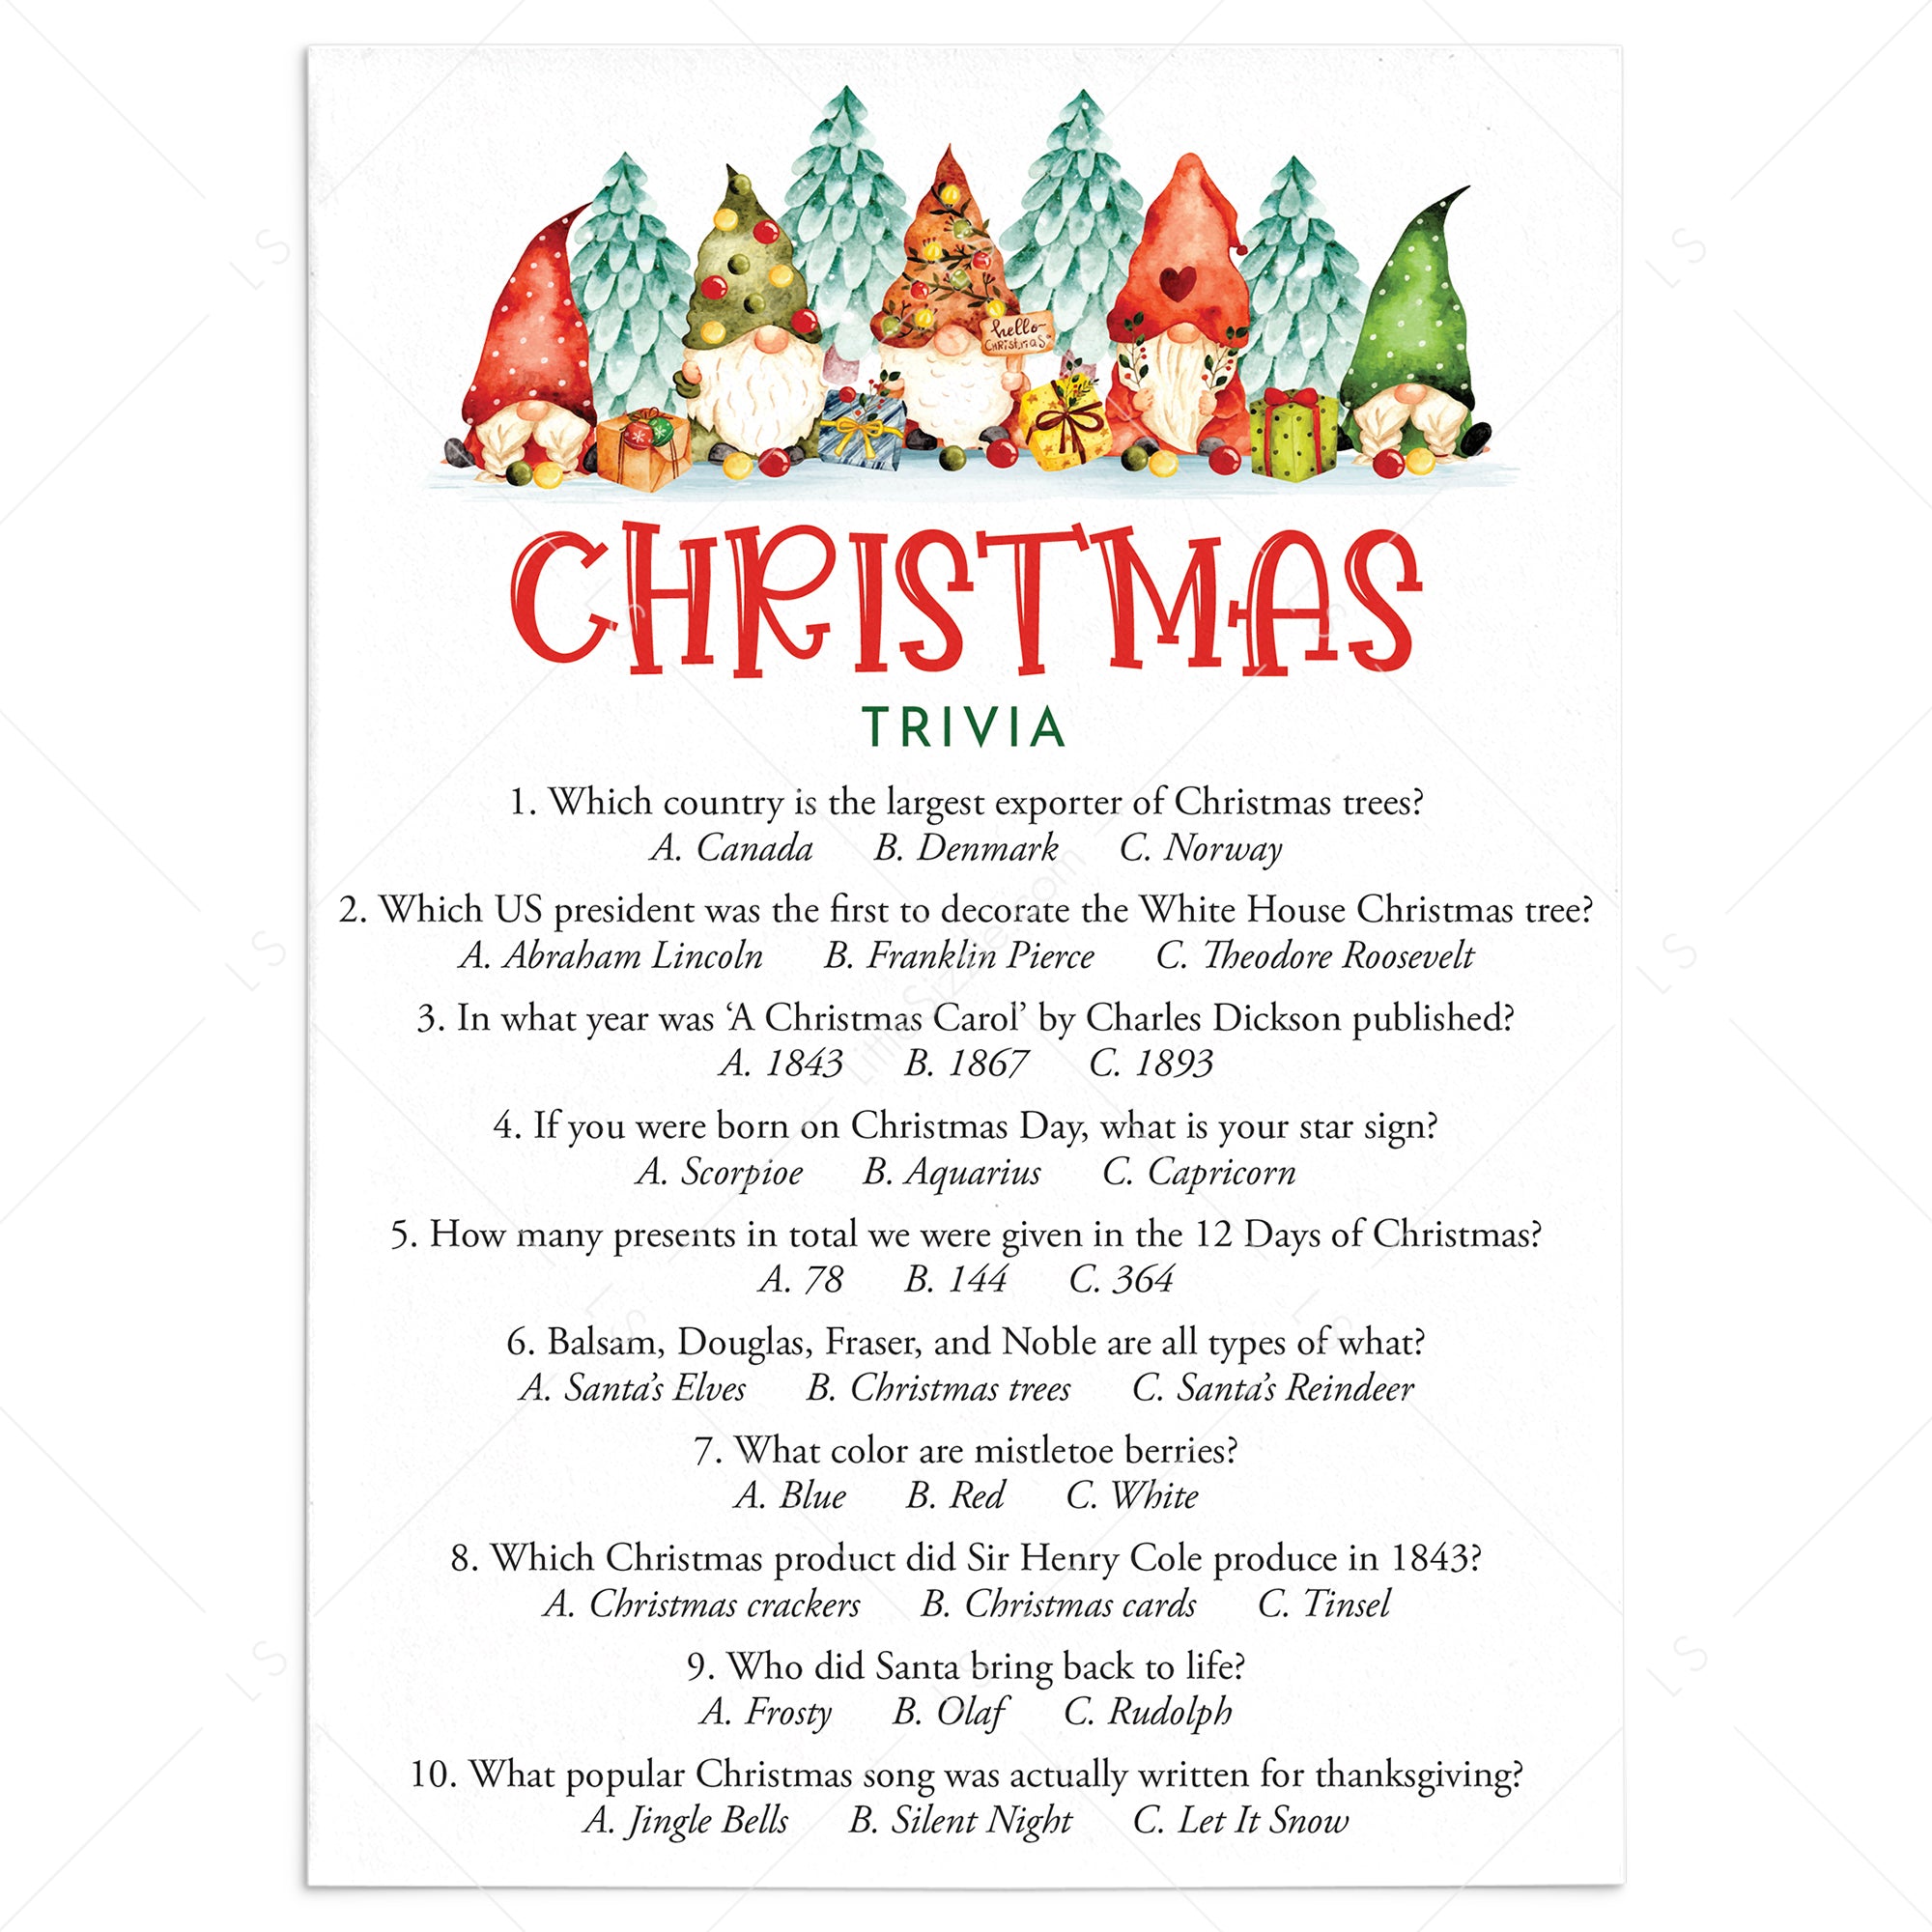 Christmas Trivia Quiz for Kids and Adults Printable Answers Included